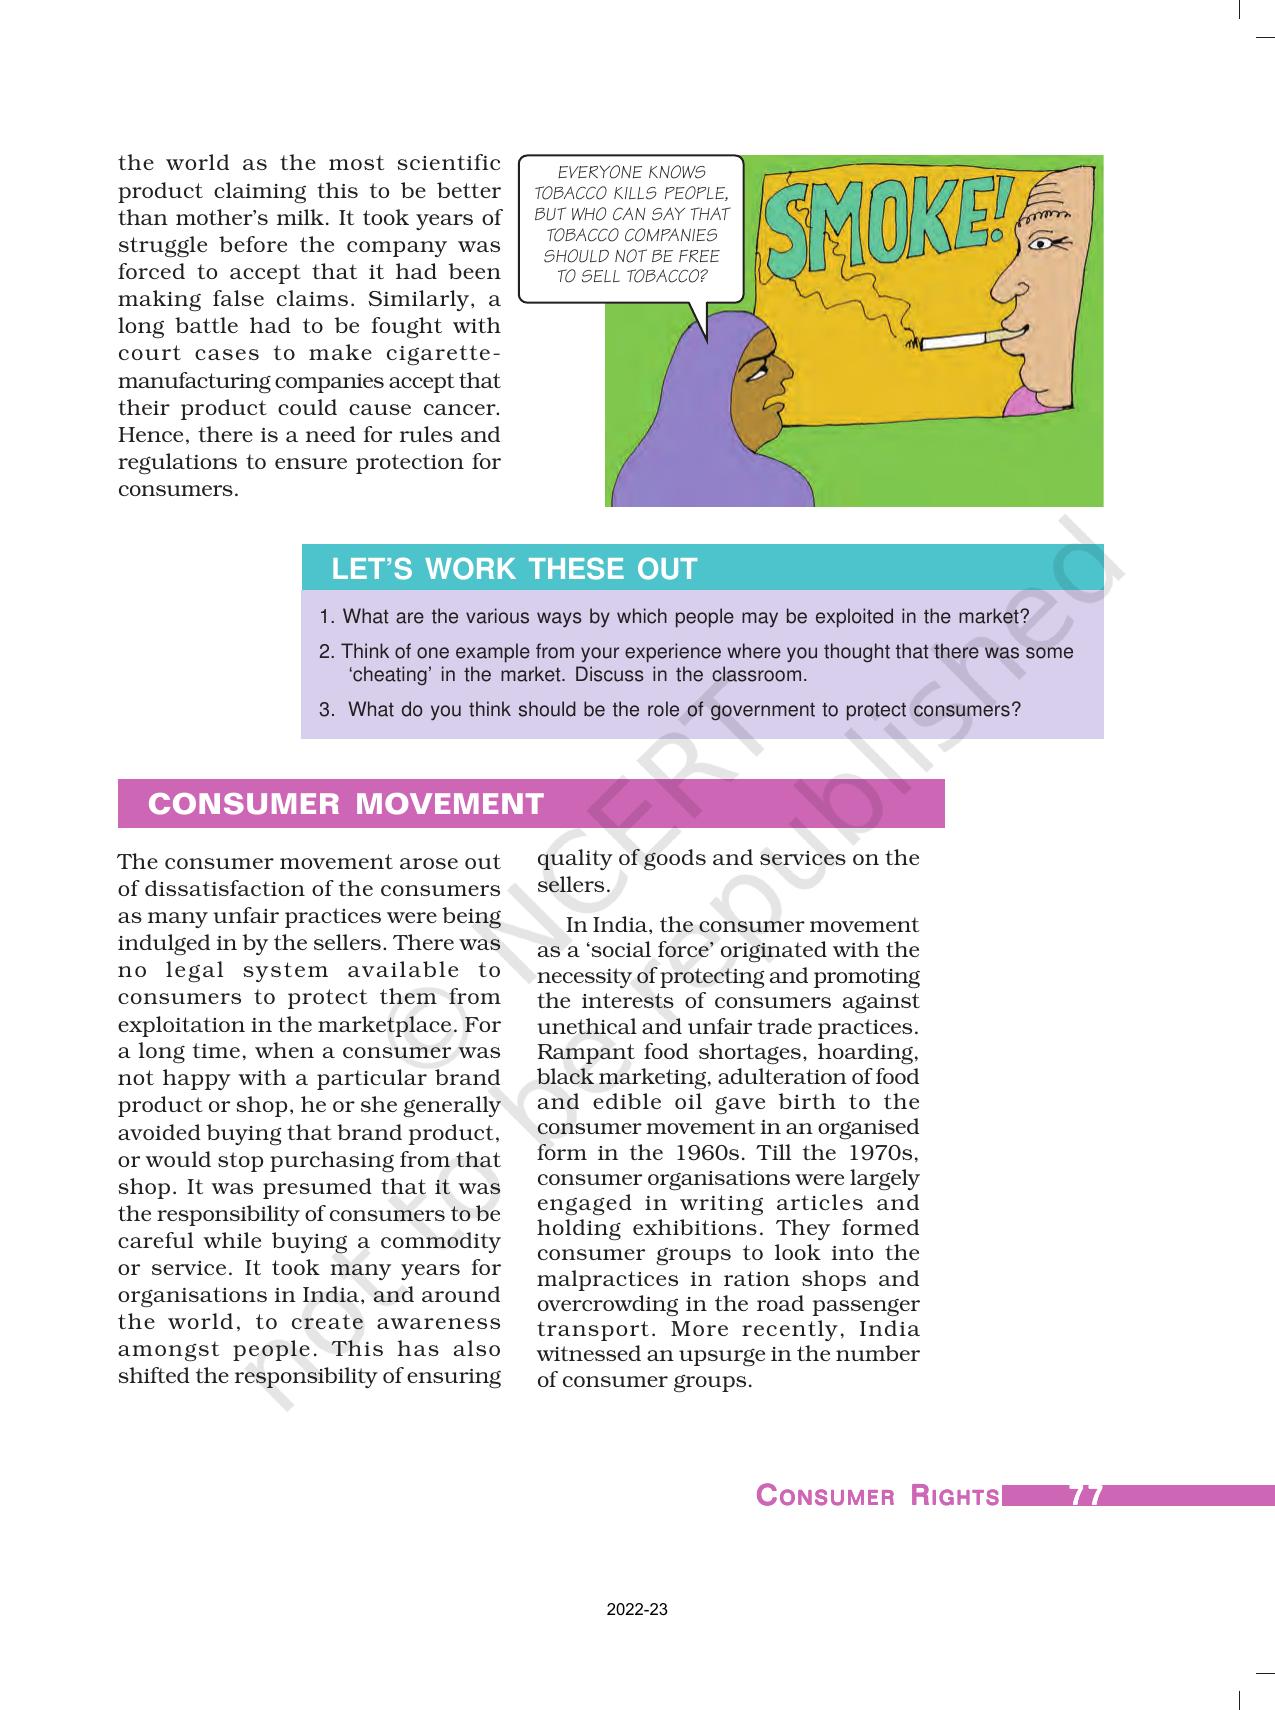 NCERT Book for Class 10 Economics Chapter 5 Consumer Rights - Page 4